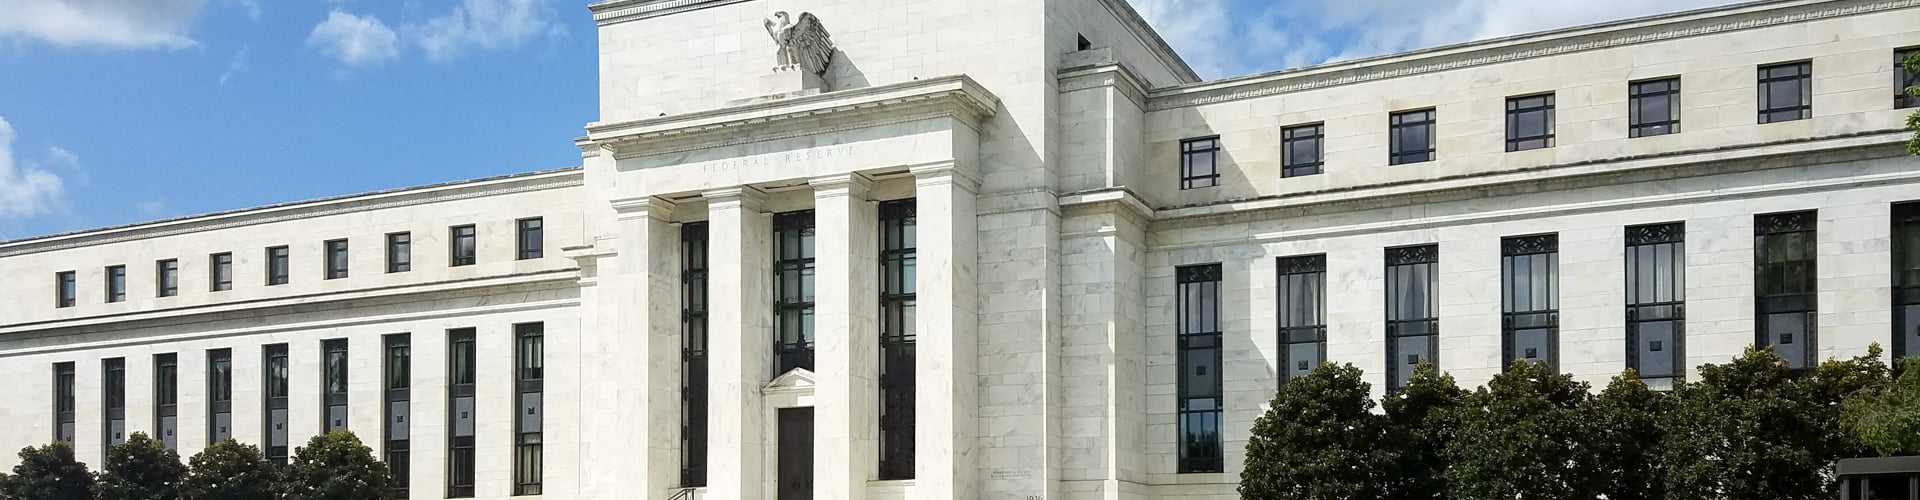 Image of Federal Reserve building in USA